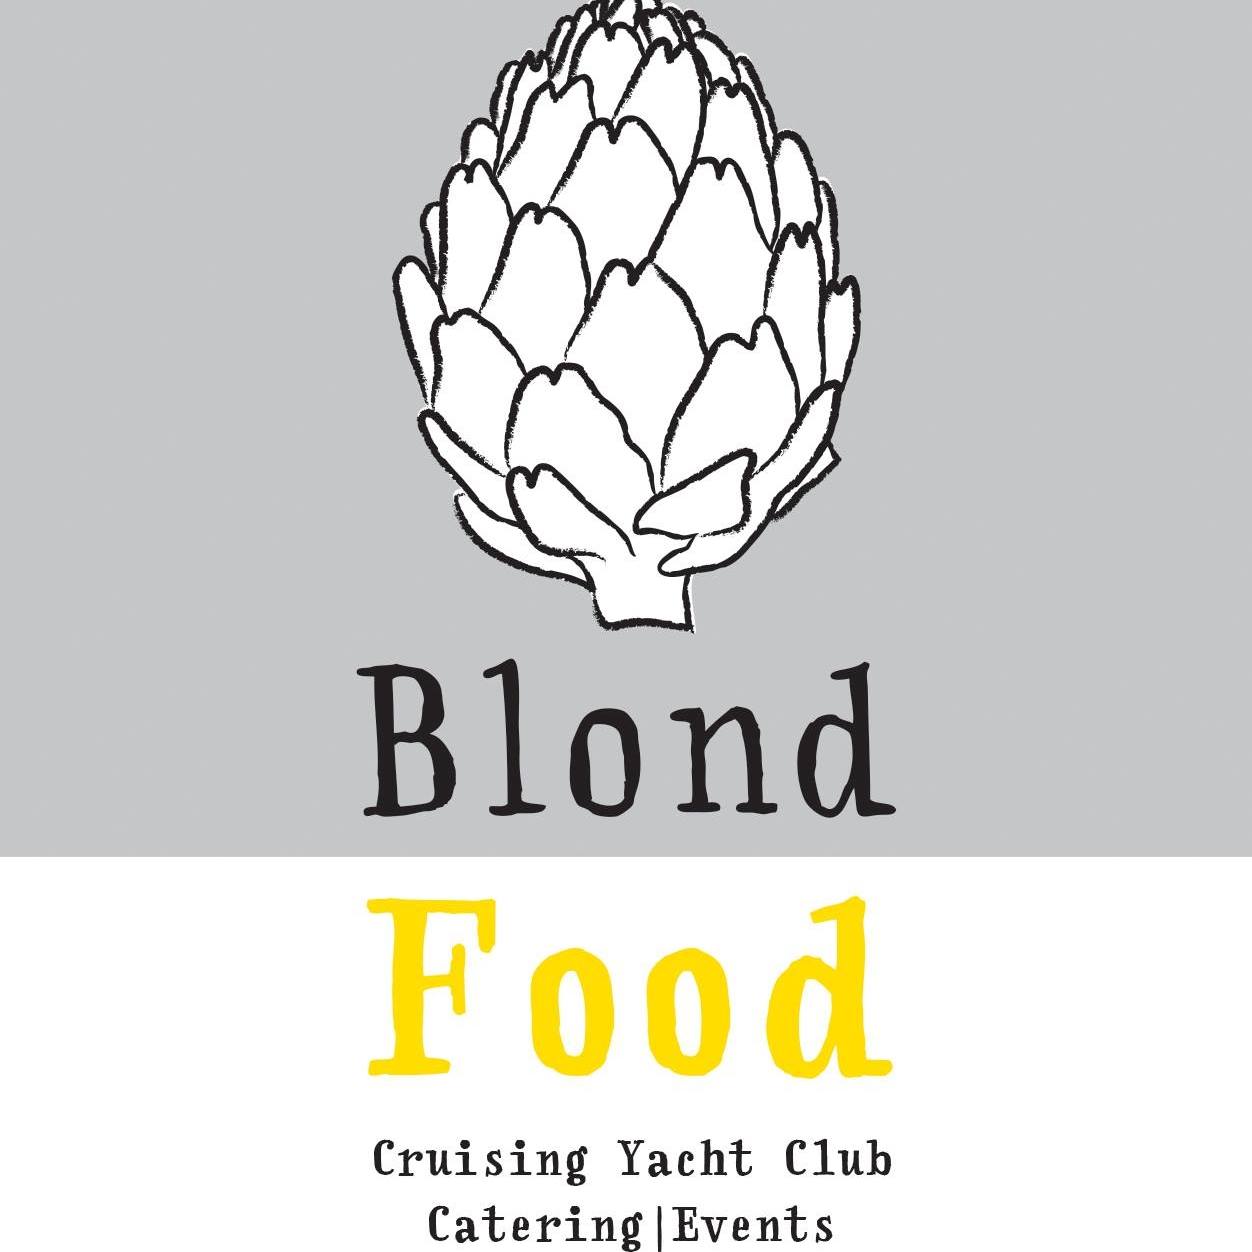 Blond Catering